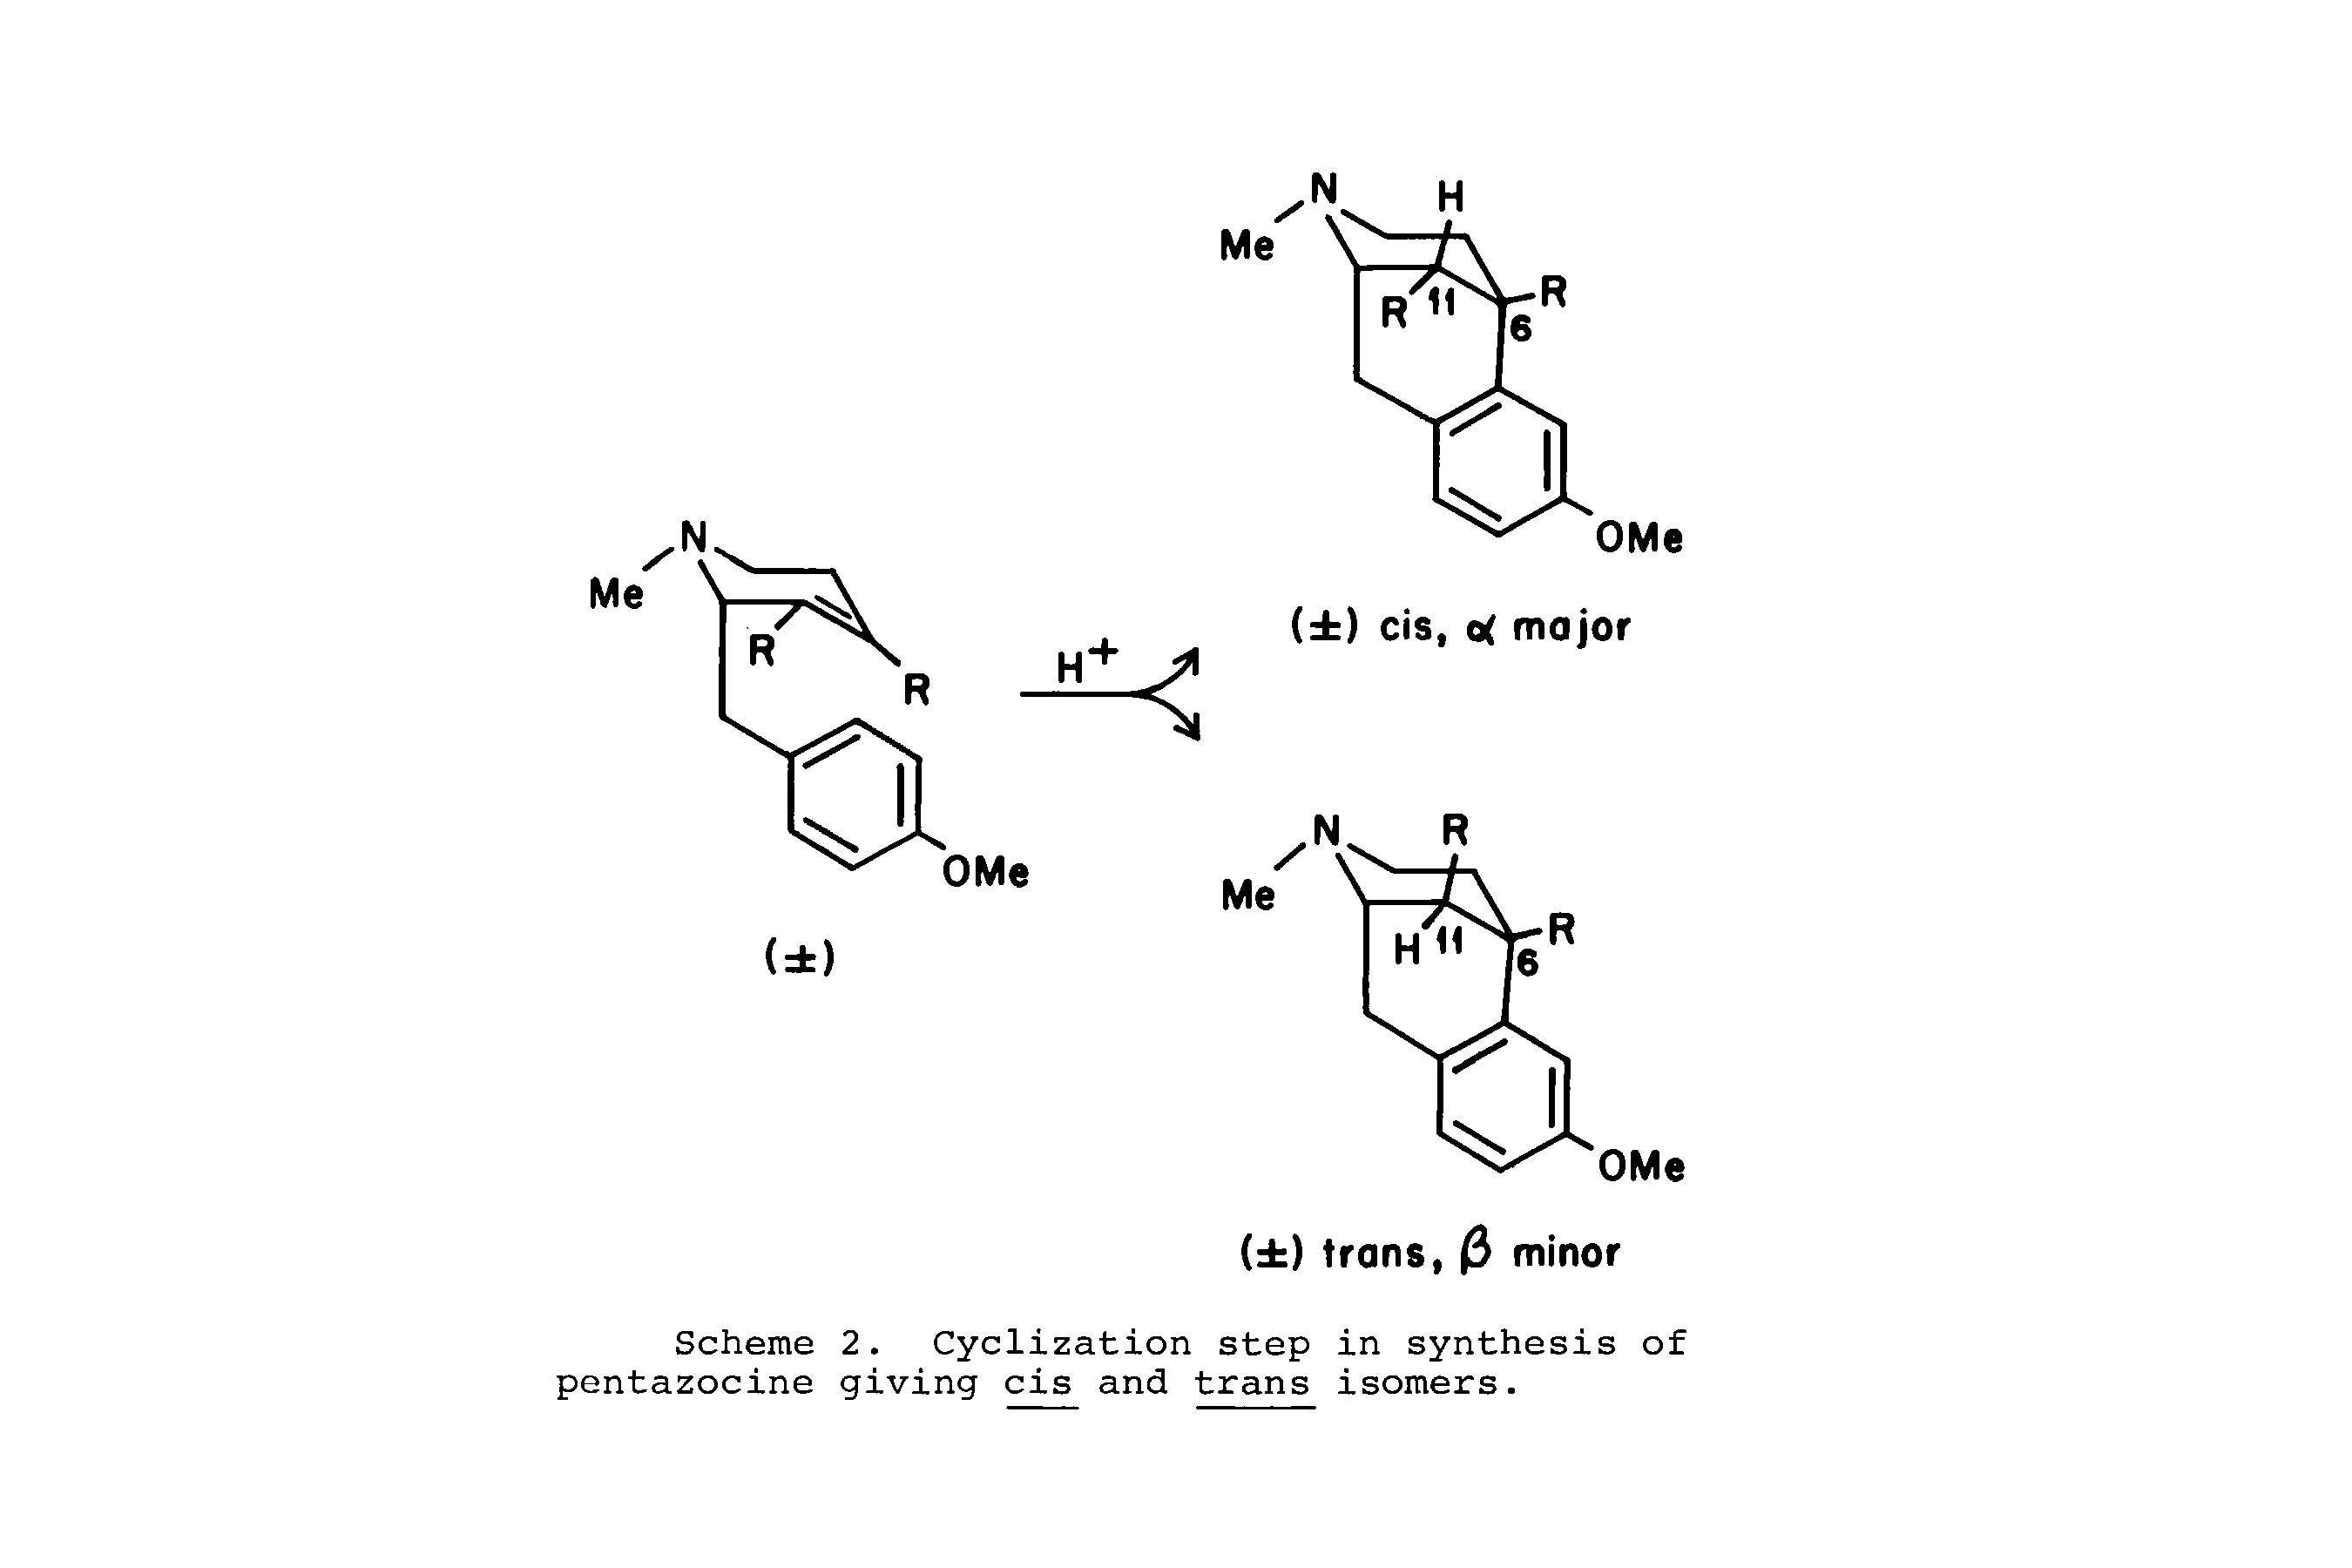 Scheme 2. Cyclization step in synthesis of pentazocine giving cis and trans isomers.